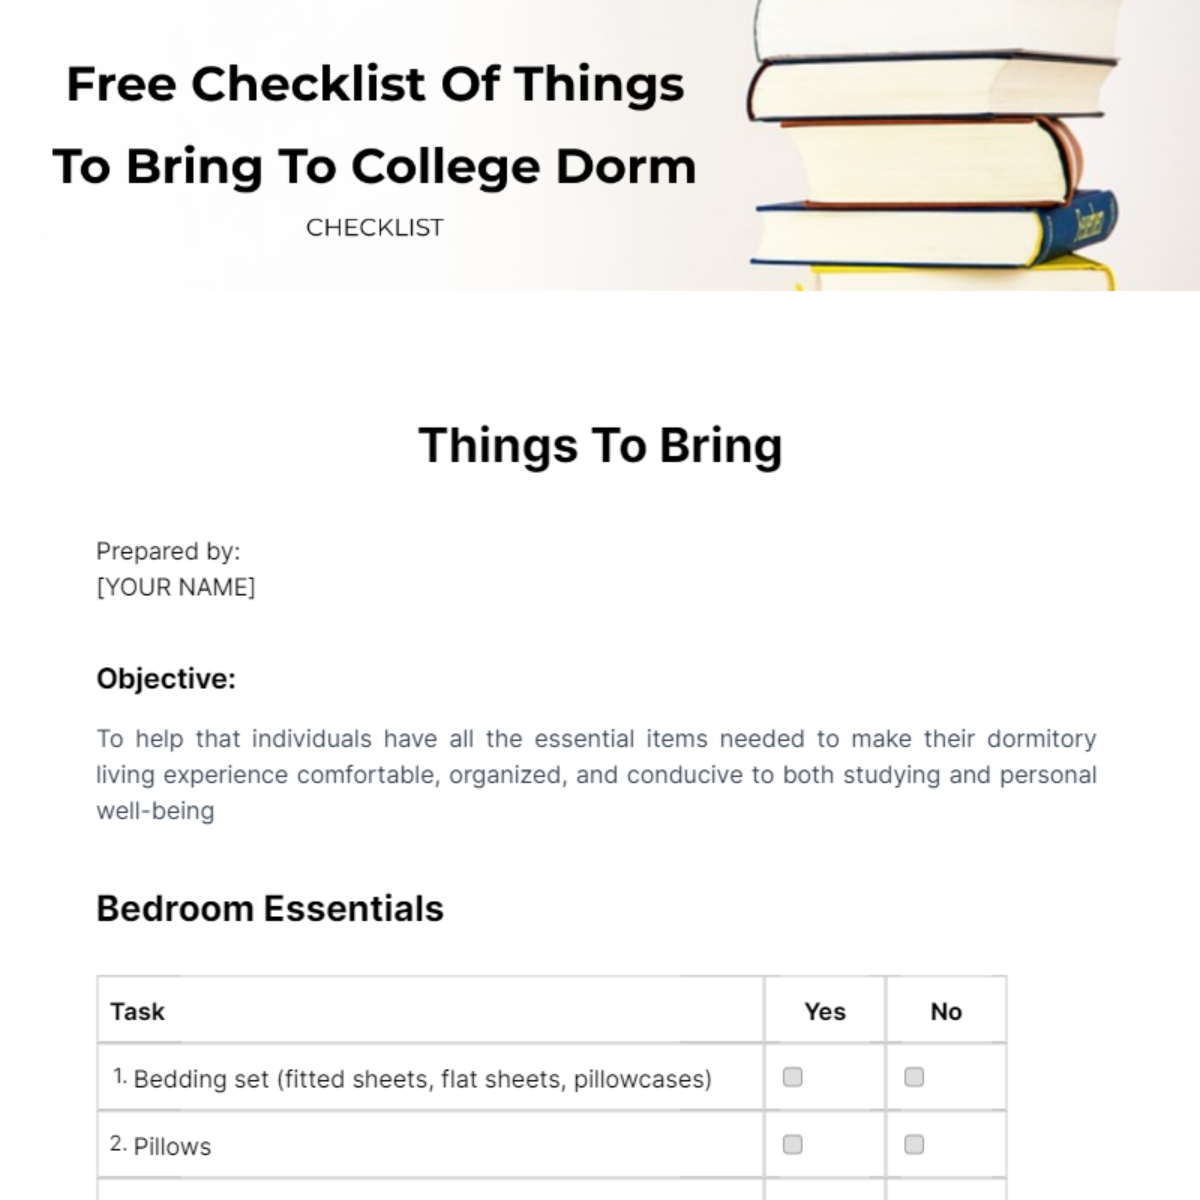 Free Checklist Of Things To Bring To College Dorm Template